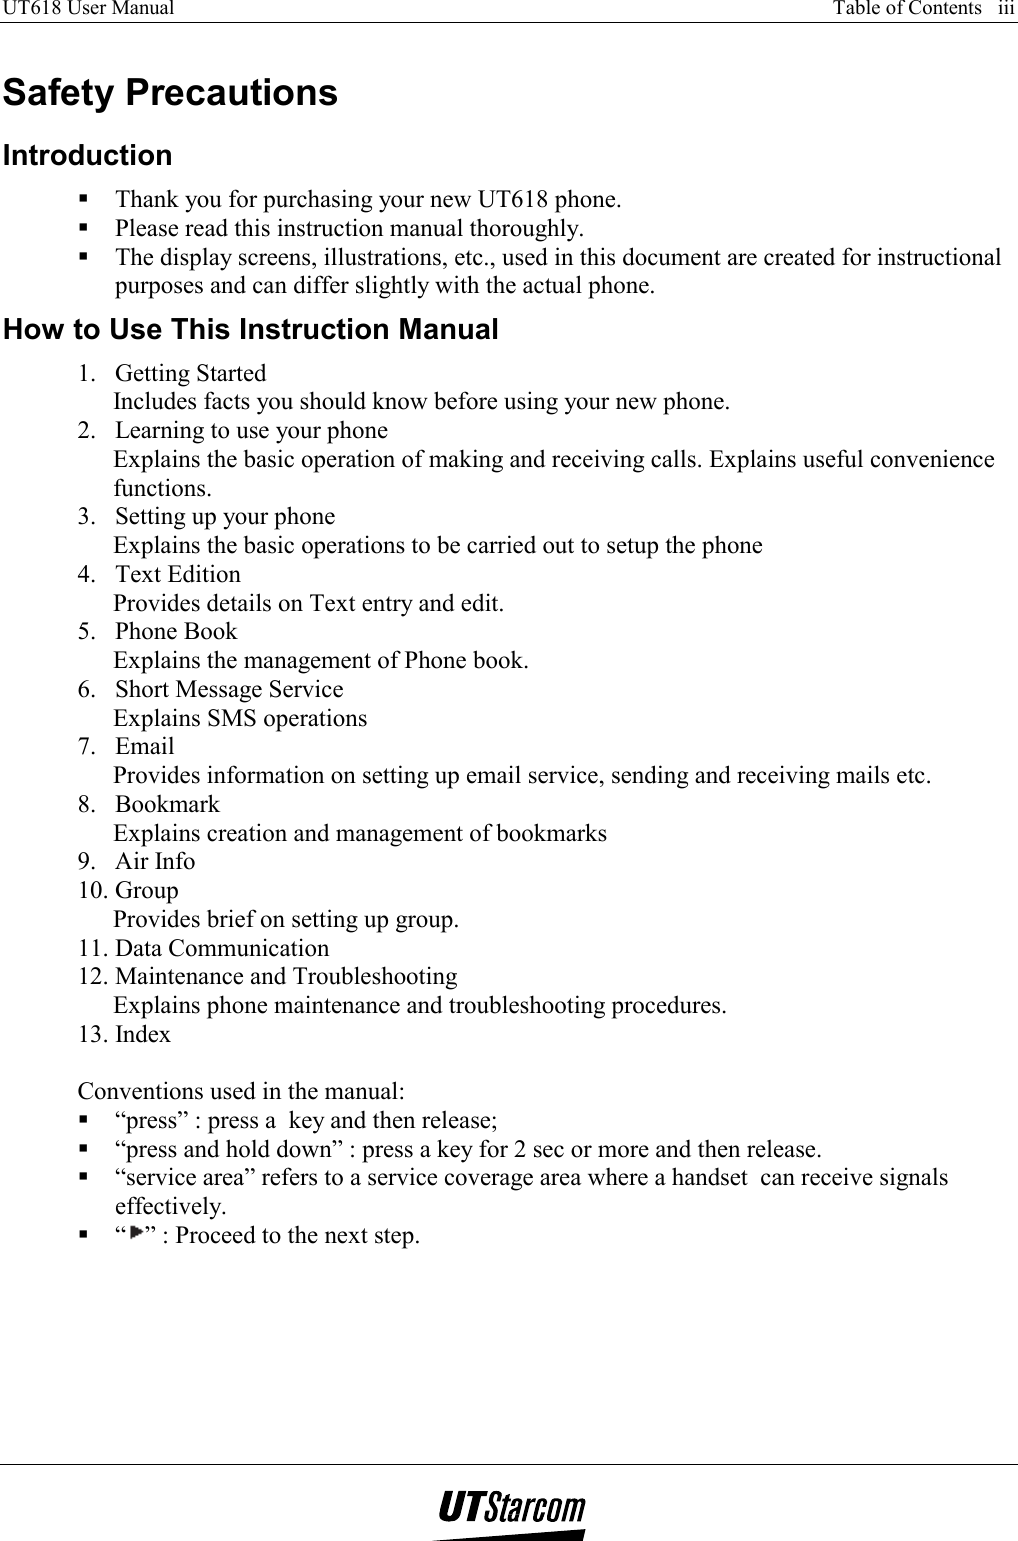 UT618 User Manual      Table of Contents   iii    Safety Precautions Introduction  Thank you for purchasing your new UT618 phone.  Please read this instruction manual thoroughly.  The display screens, illustrations, etc., used in this document are created for instructional purposes and can differ slightly with the actual phone.  How to Use This Instruction Manual 1. Getting Started Includes facts you should know before using your new phone. 2.  Learning to use your phone Explains the basic operation of making and receiving calls. Explains useful convenience functions. 3.  Setting up your phone Explains the basic operations to be carried out to setup the phone 4. Text Edition Provides details on Text entry and edit. 5. Phone Book Explains the management of Phone book. 6.  Short Message Service Explains SMS operations 7. Email Provides information on setting up email service, sending and receiving mails etc. 8. Bookmark Explains creation and management of bookmarks 9. Air Info 10. Group Provides brief on setting up group. 11. Data Communication 12. Maintenance and Troubleshooting Explains phone maintenance and troubleshooting procedures. 13. Index  Conventions used in the manual:  “press” : press a  key and then release;  “press and hold down” : press a key for 2 sec or more and then release.  “service area” refers to a service coverage area where a handset  can receive signals effectively.  “” : Proceed to the next step. 